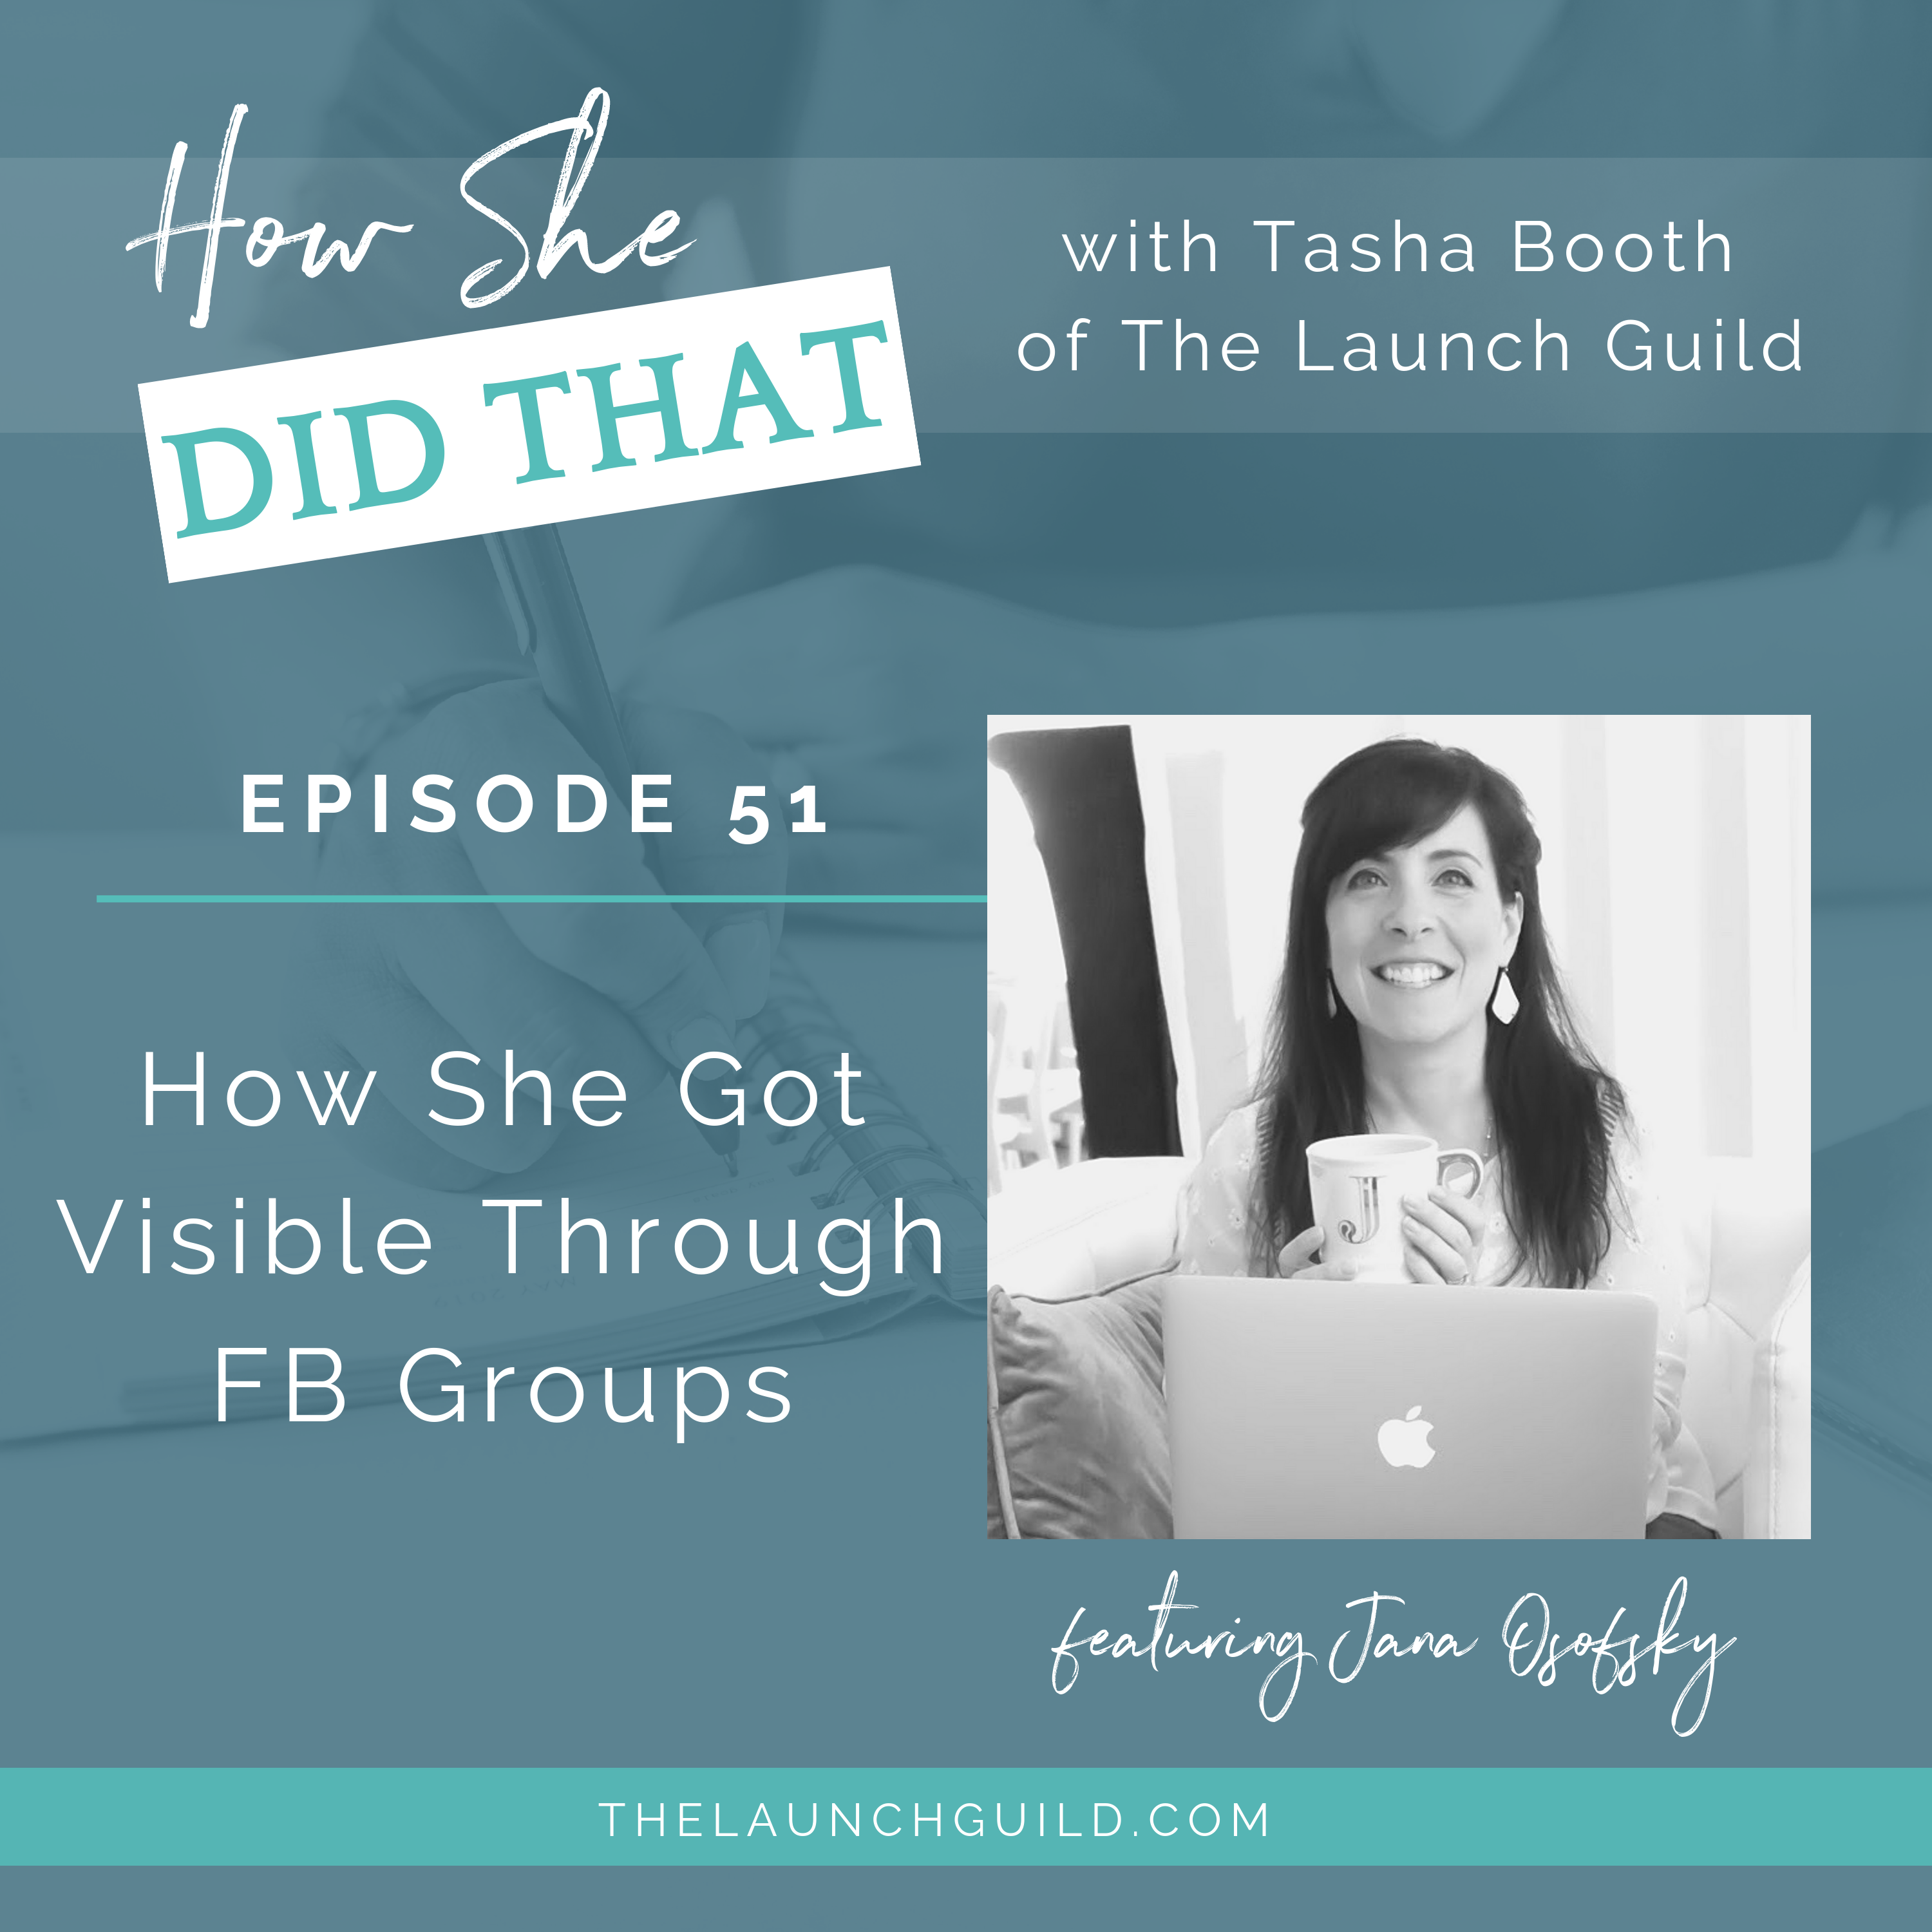 Get clients and get visible - using Facebook Group networking